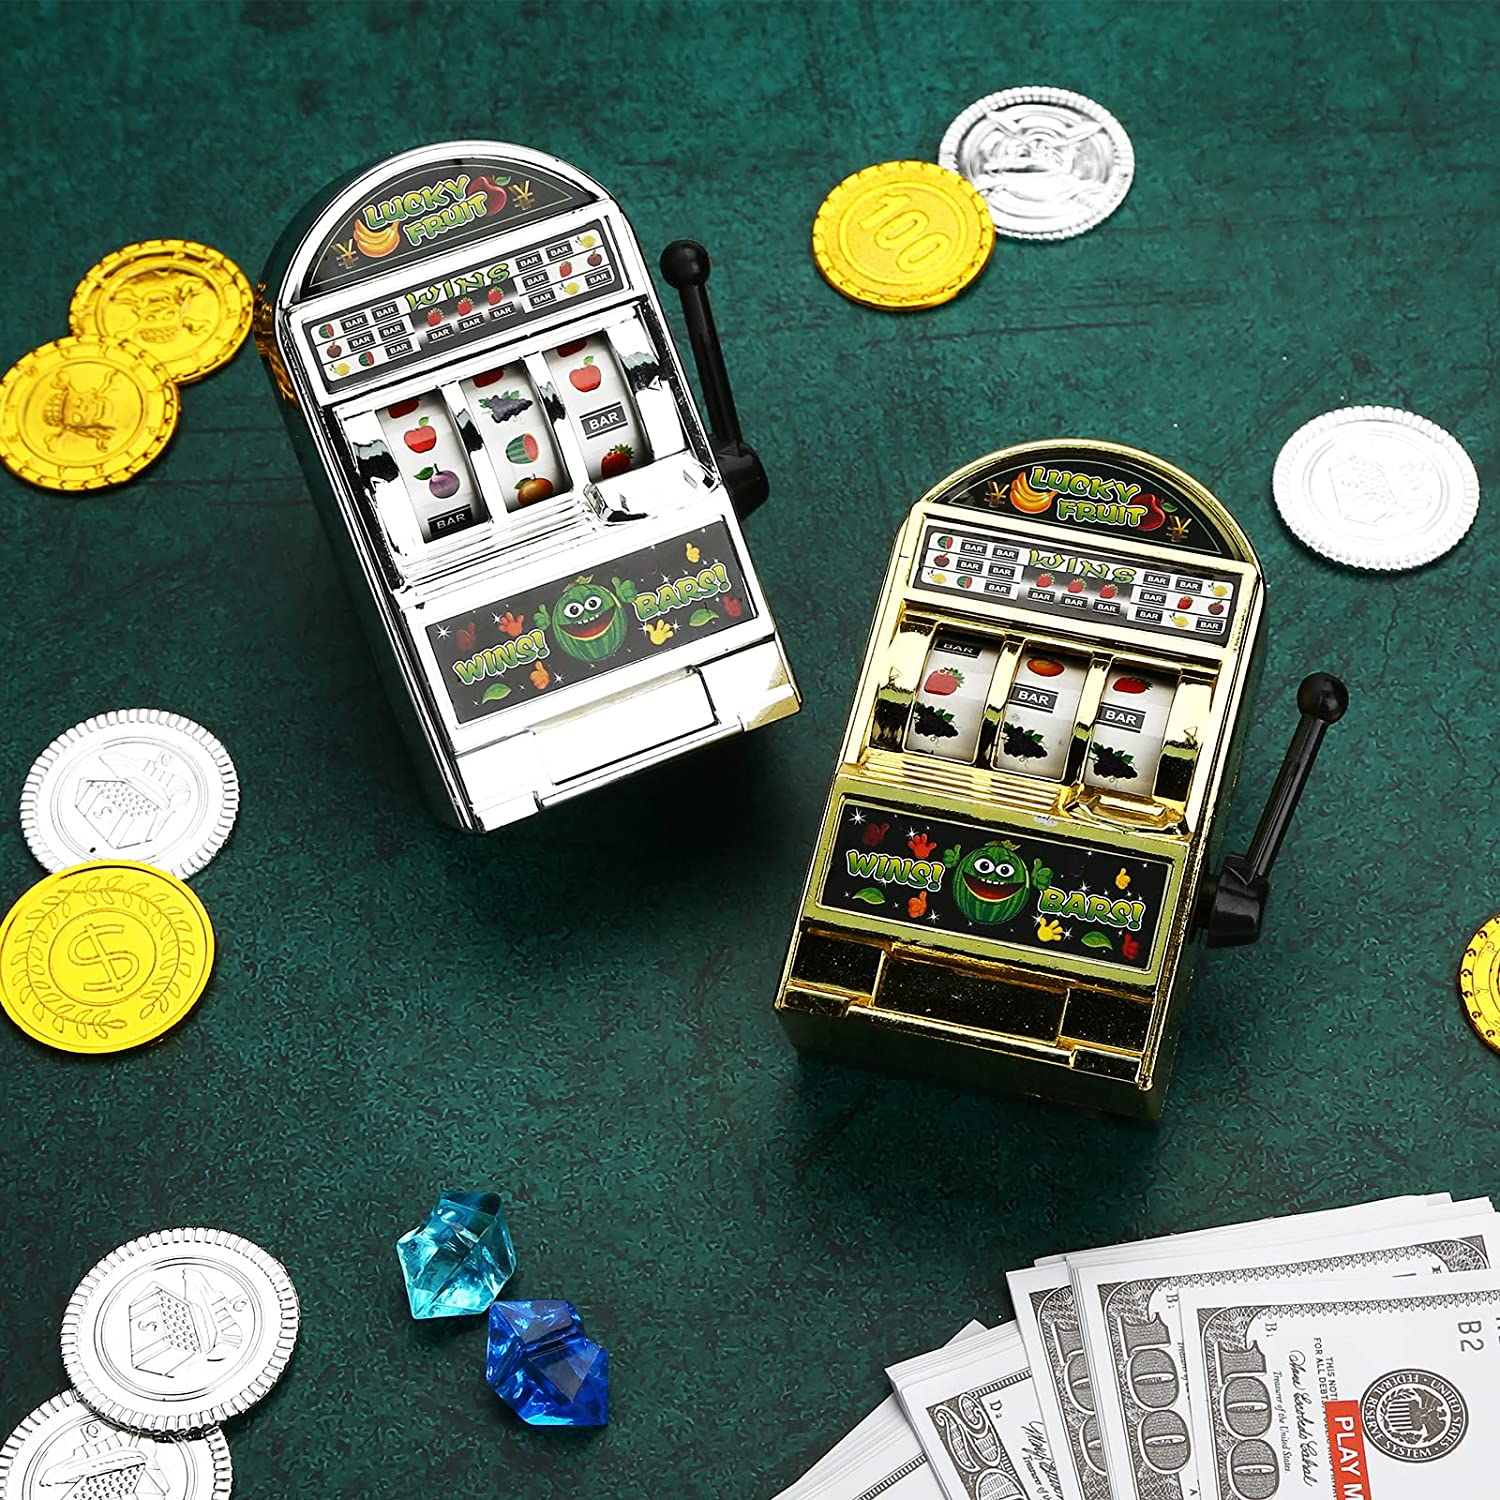 One gold and one silver mini slot machine toys laying down on green velvet with casino coin chips scattered around them.